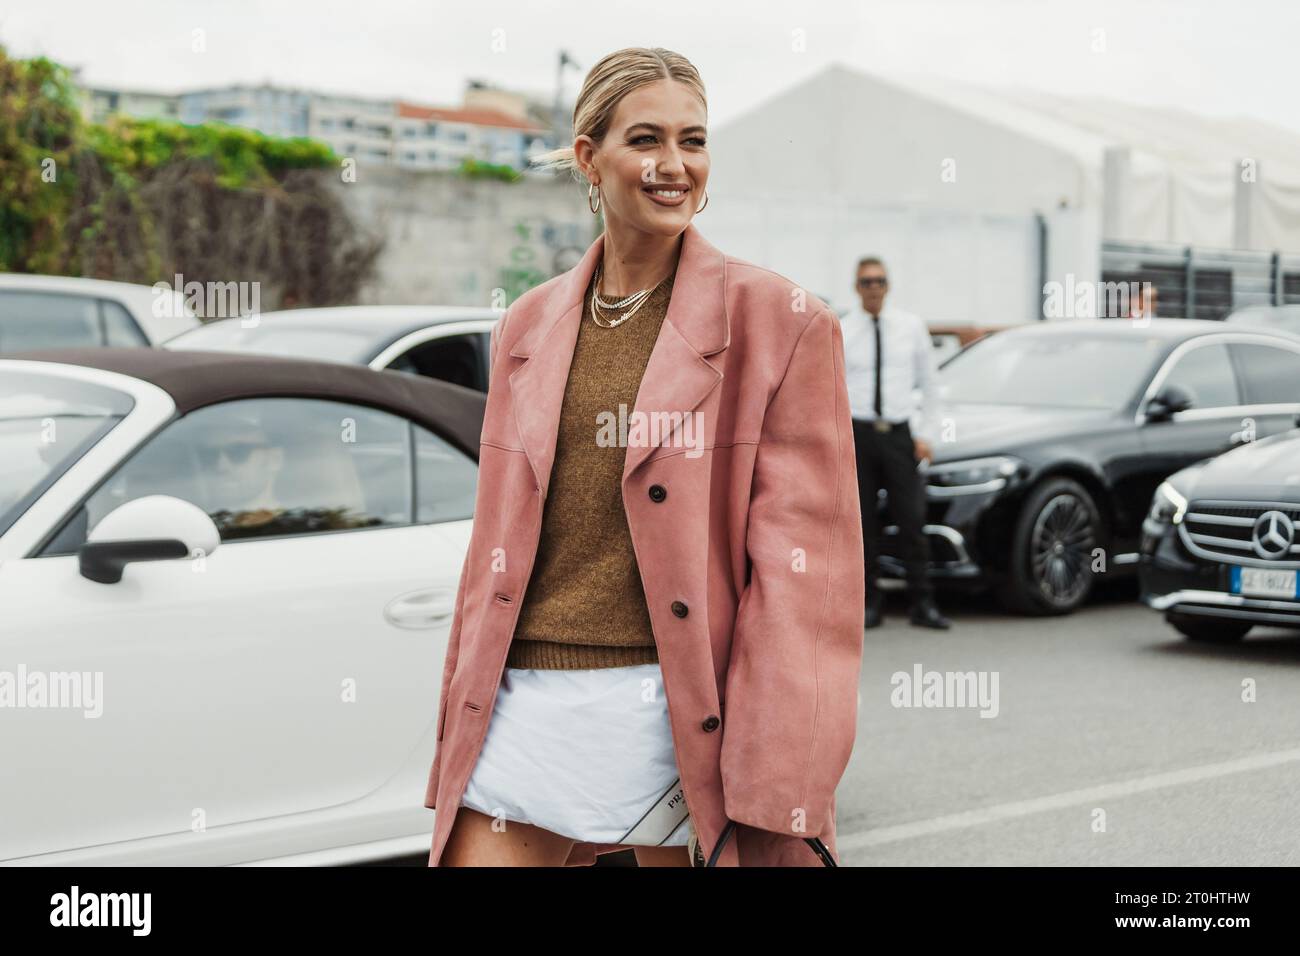 Emili Sindlev wears necklaces, a knit pullover, a pink suede oversized jacket, Prada bag, seen outside PRADA show during Milan Fashion Week Womenswear Stock Photo